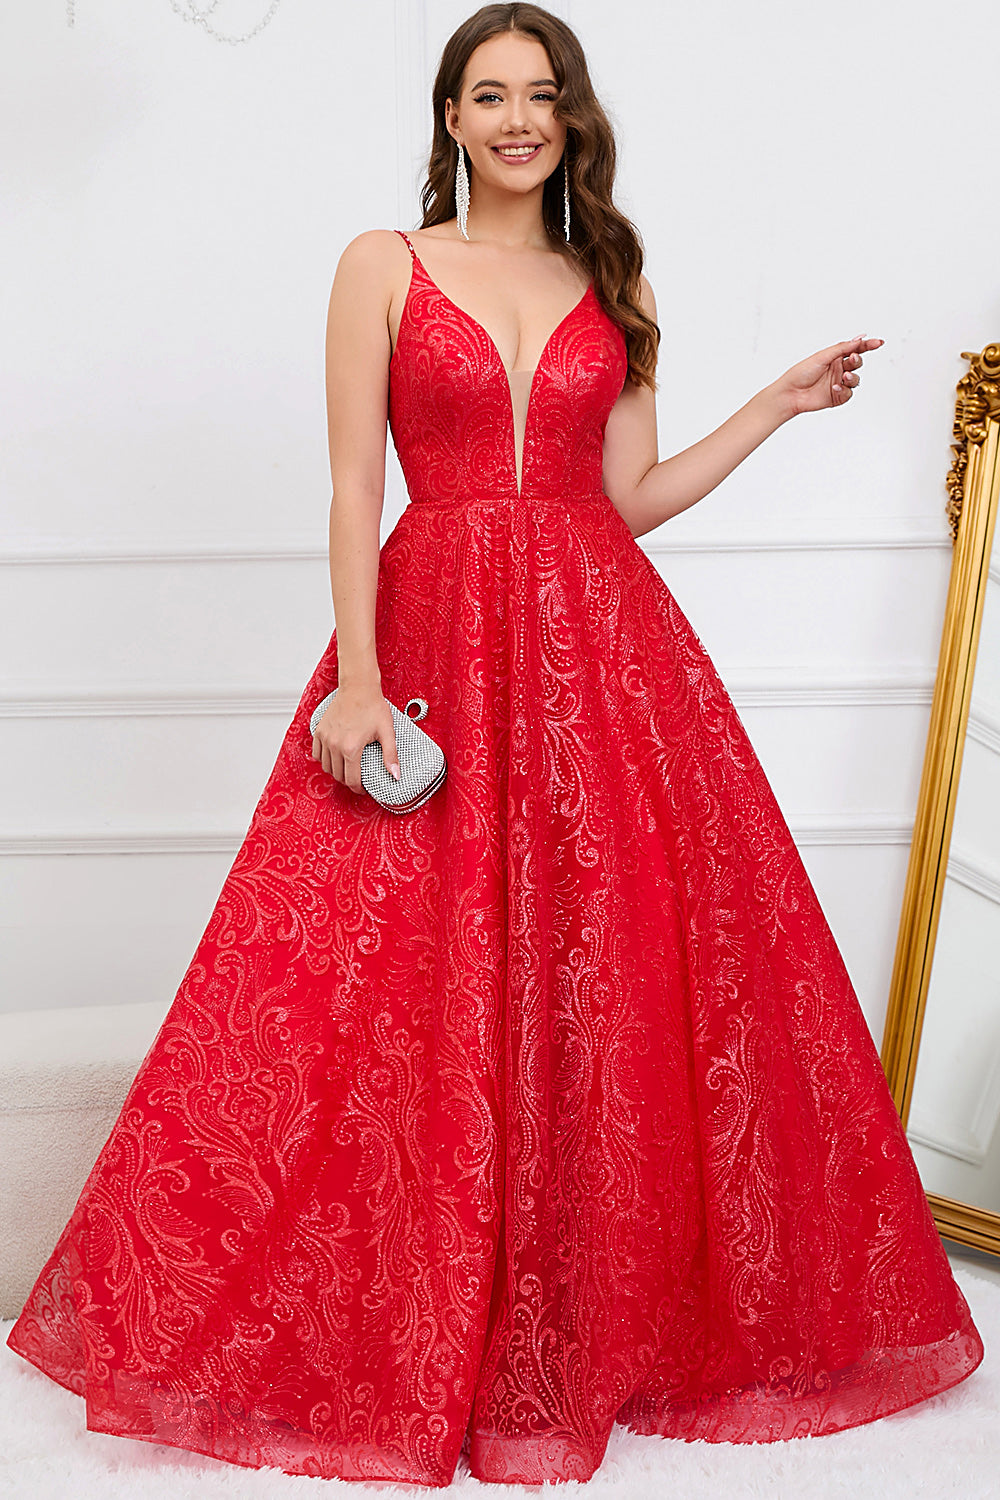 Deep V-Neck Backless Red Ball Gown Dress